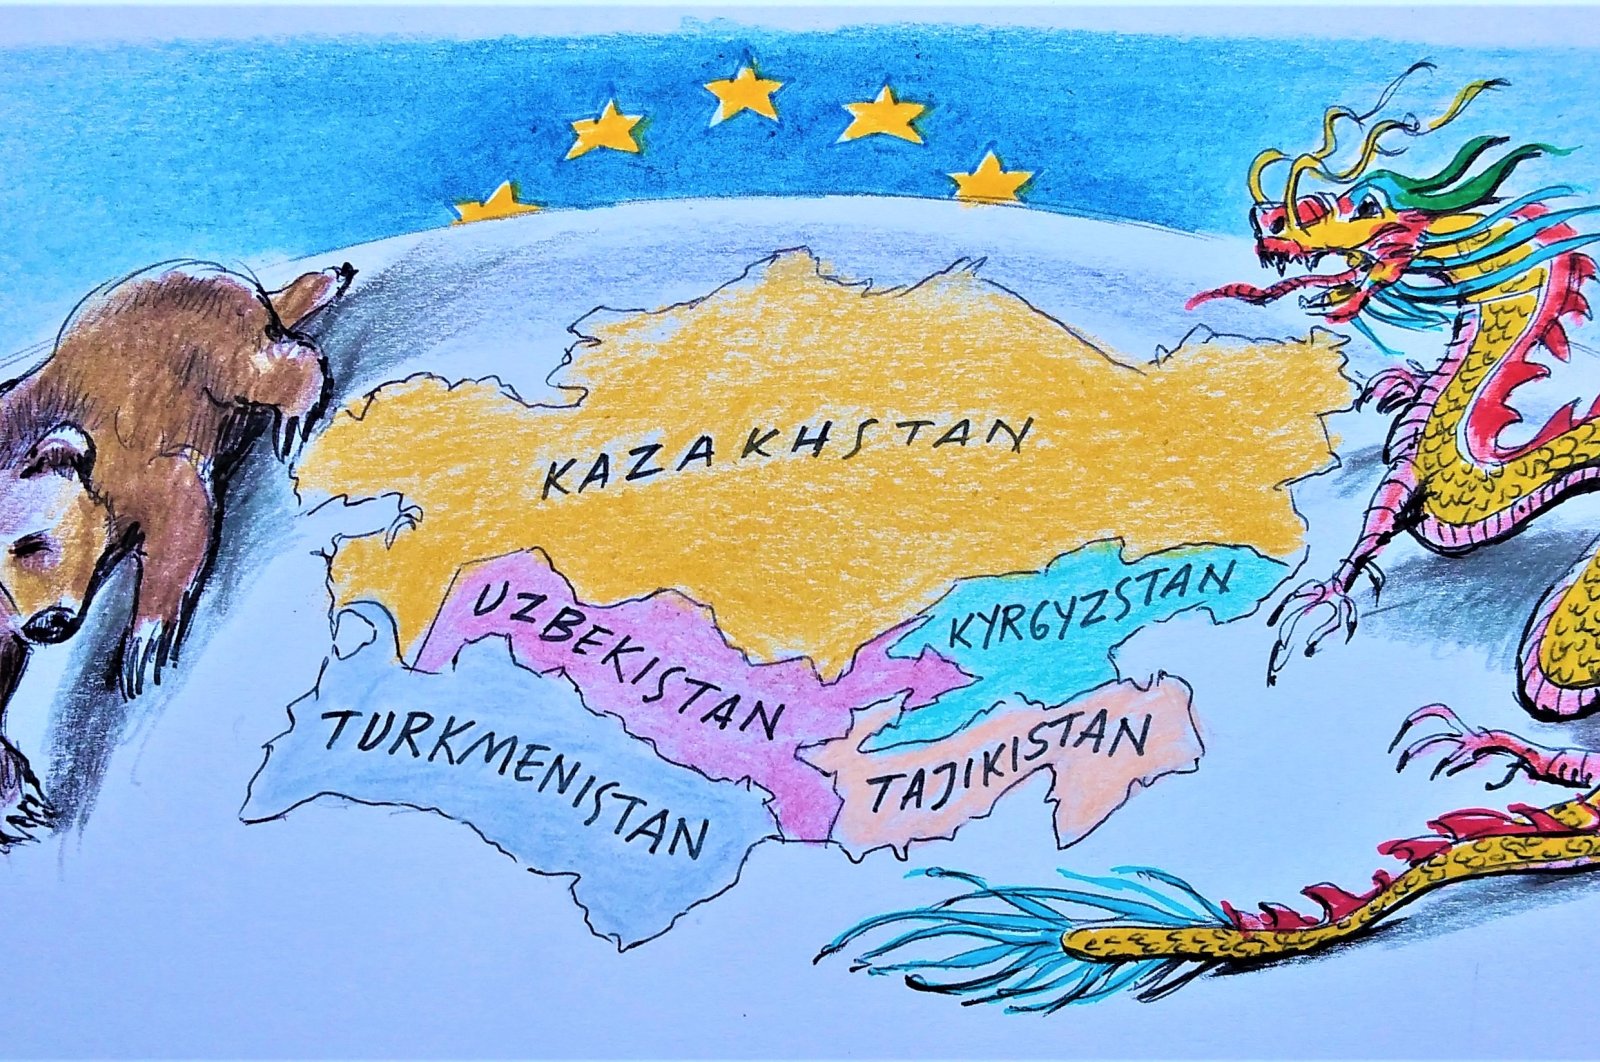 While these countries achieved independence from the Soviet Union, they maintained close ties with Russia, their traditional partner, however, subsequent sanctions have created a need for the Central Asian republics to diversify their partnerships. (Illustration by Erhan Yalvaç)